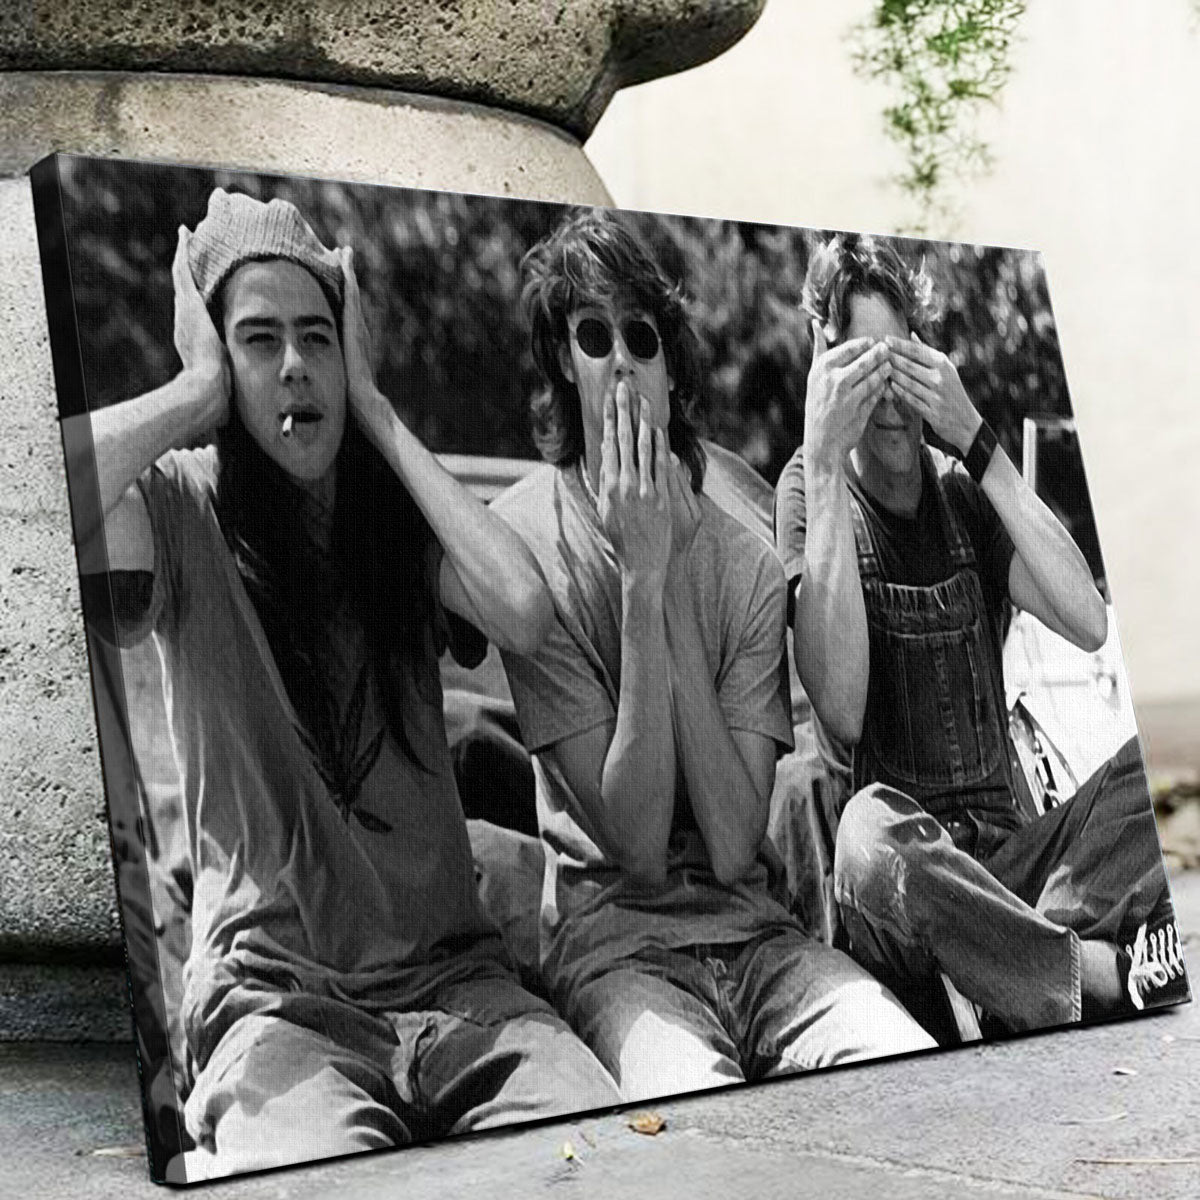 Dazed and Confused Canvas Set